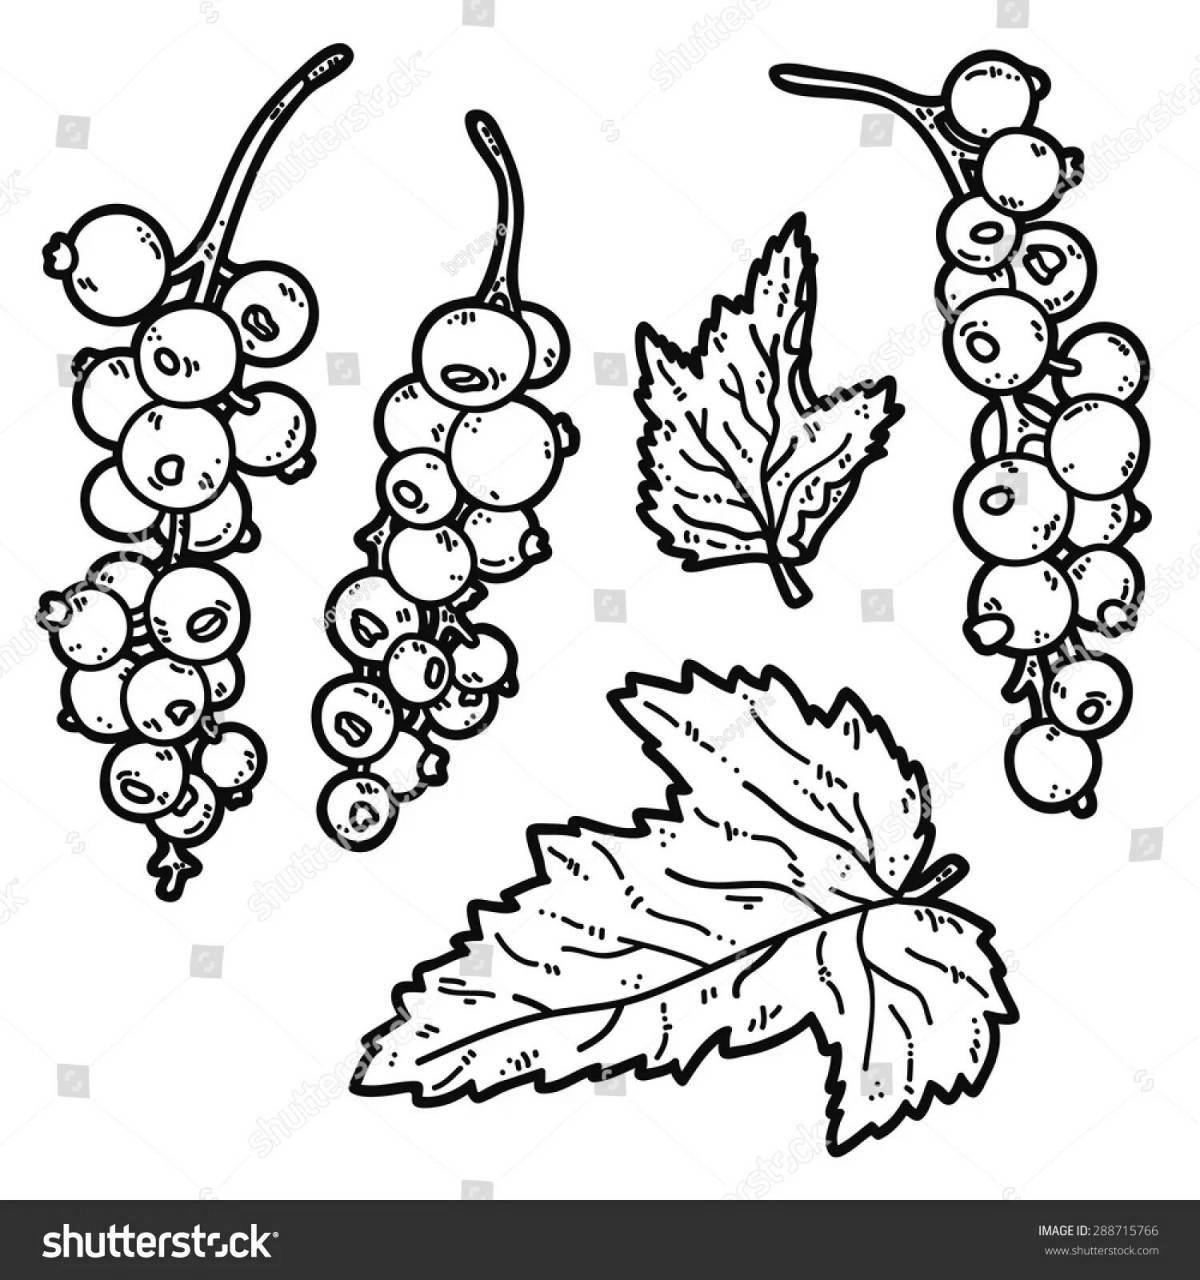 Funny currant coloring page for students